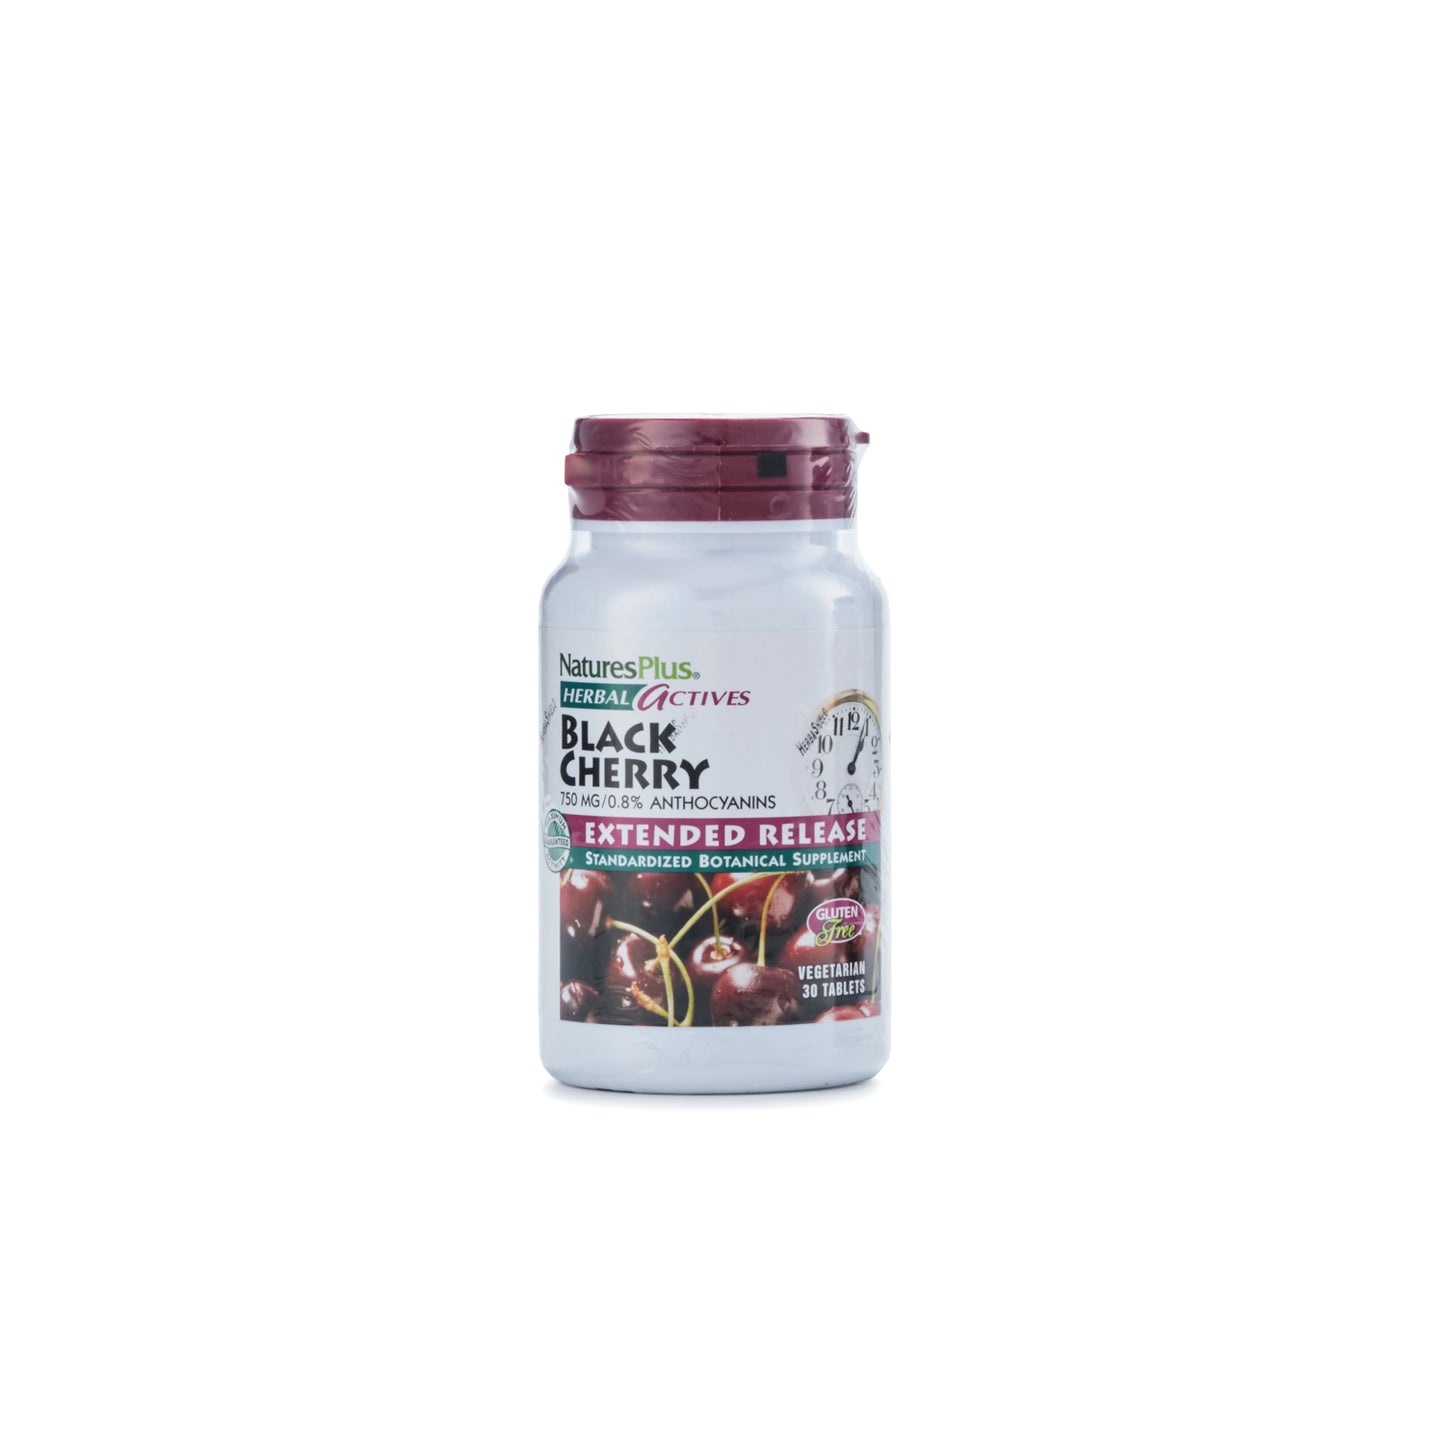 Nature's Plus Black Cherry Extended Release 750mg 30 Tablets